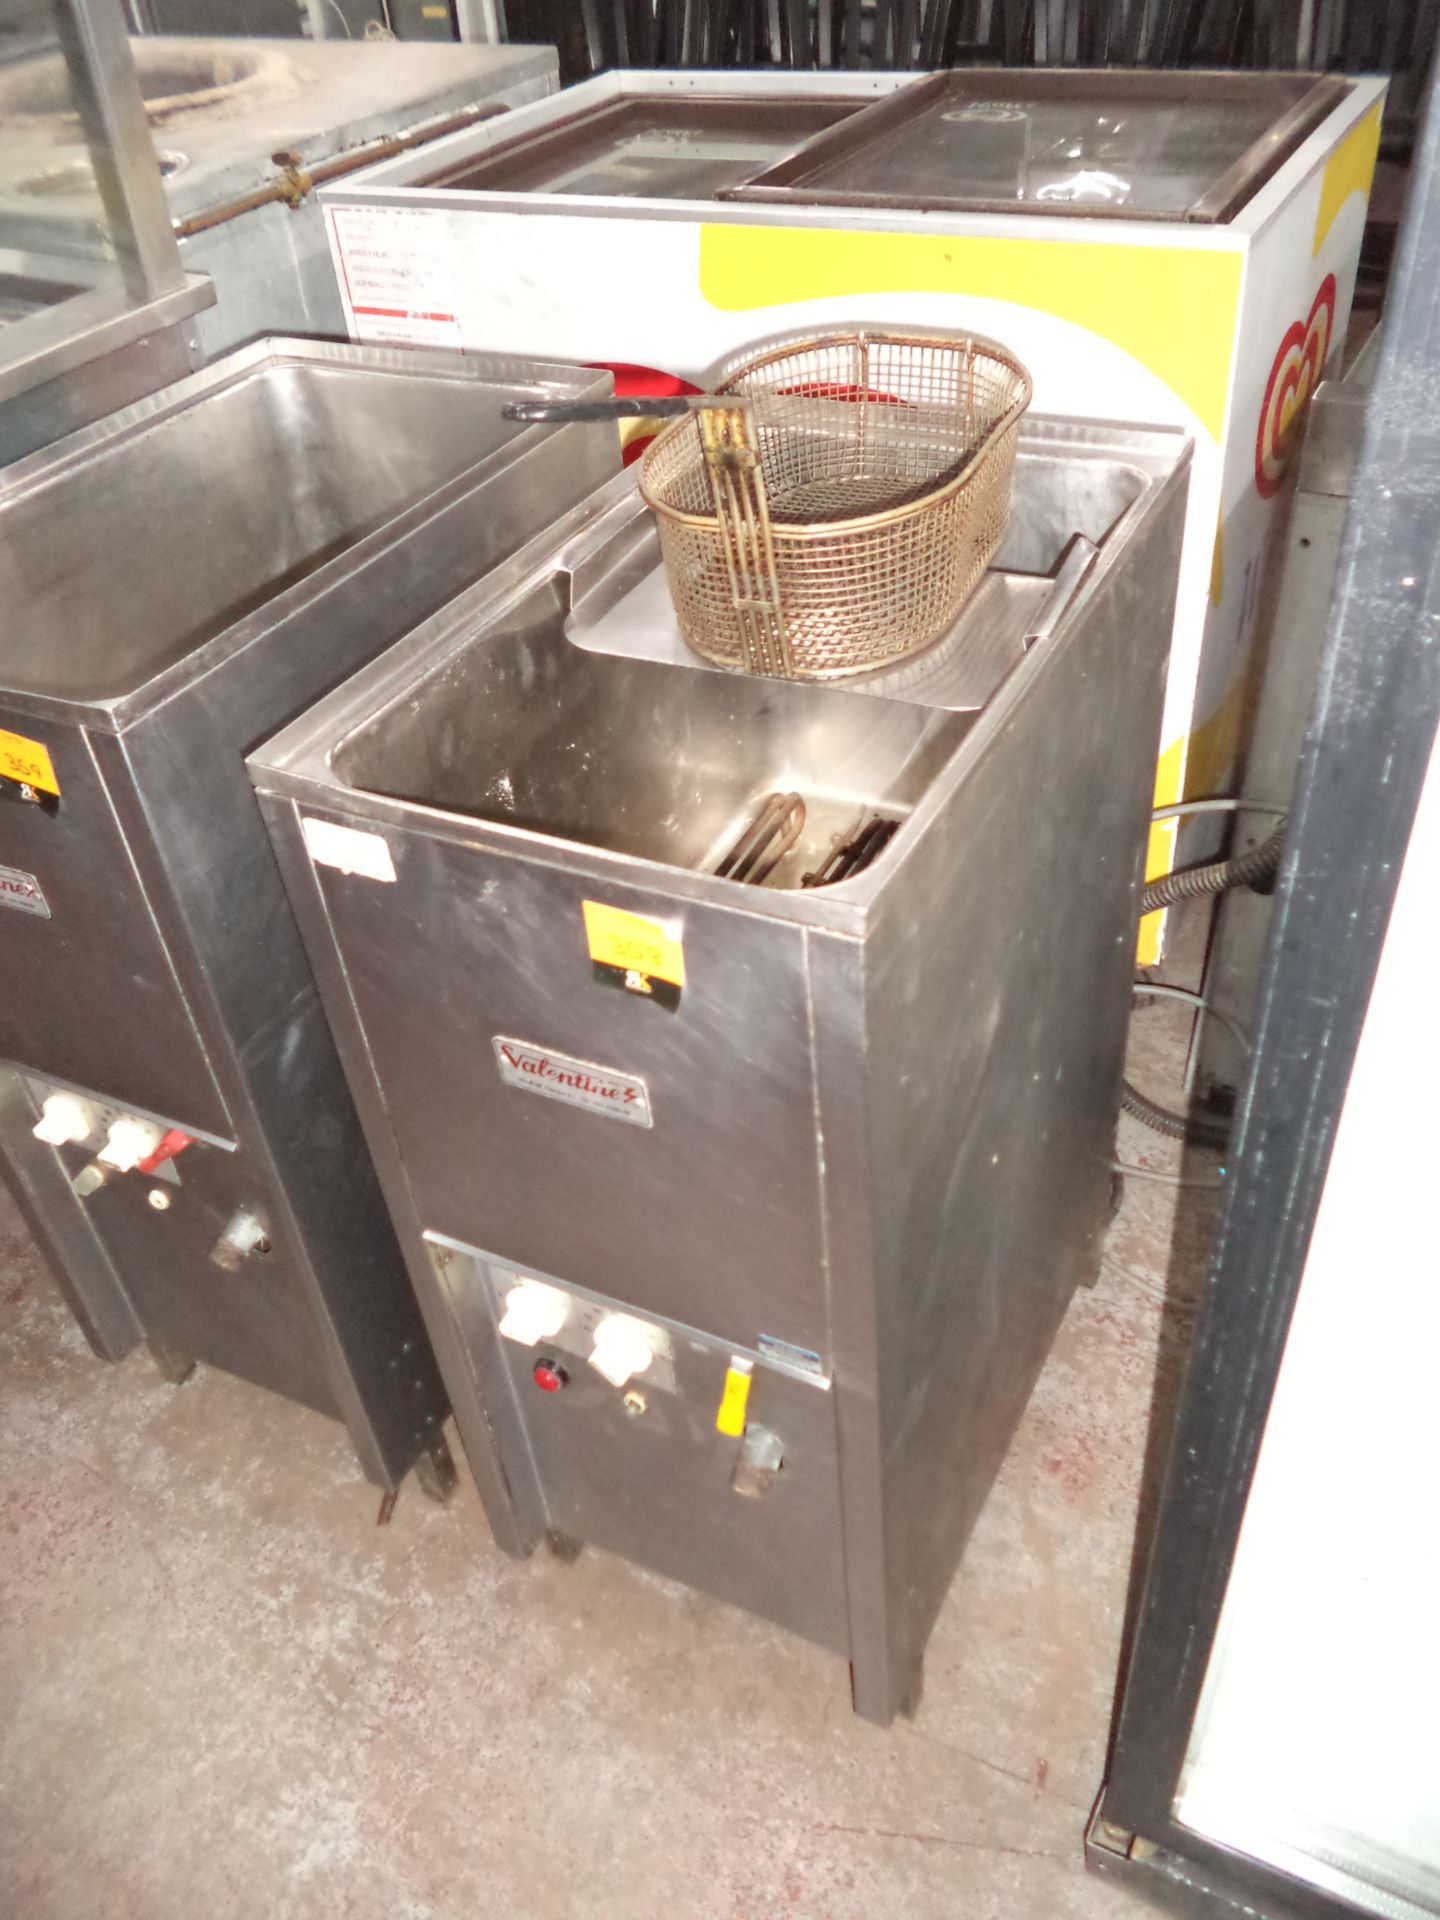 Valentine model VMC1 pasta boiler IMPORTANT: Please remember goods successfully bid upon must be